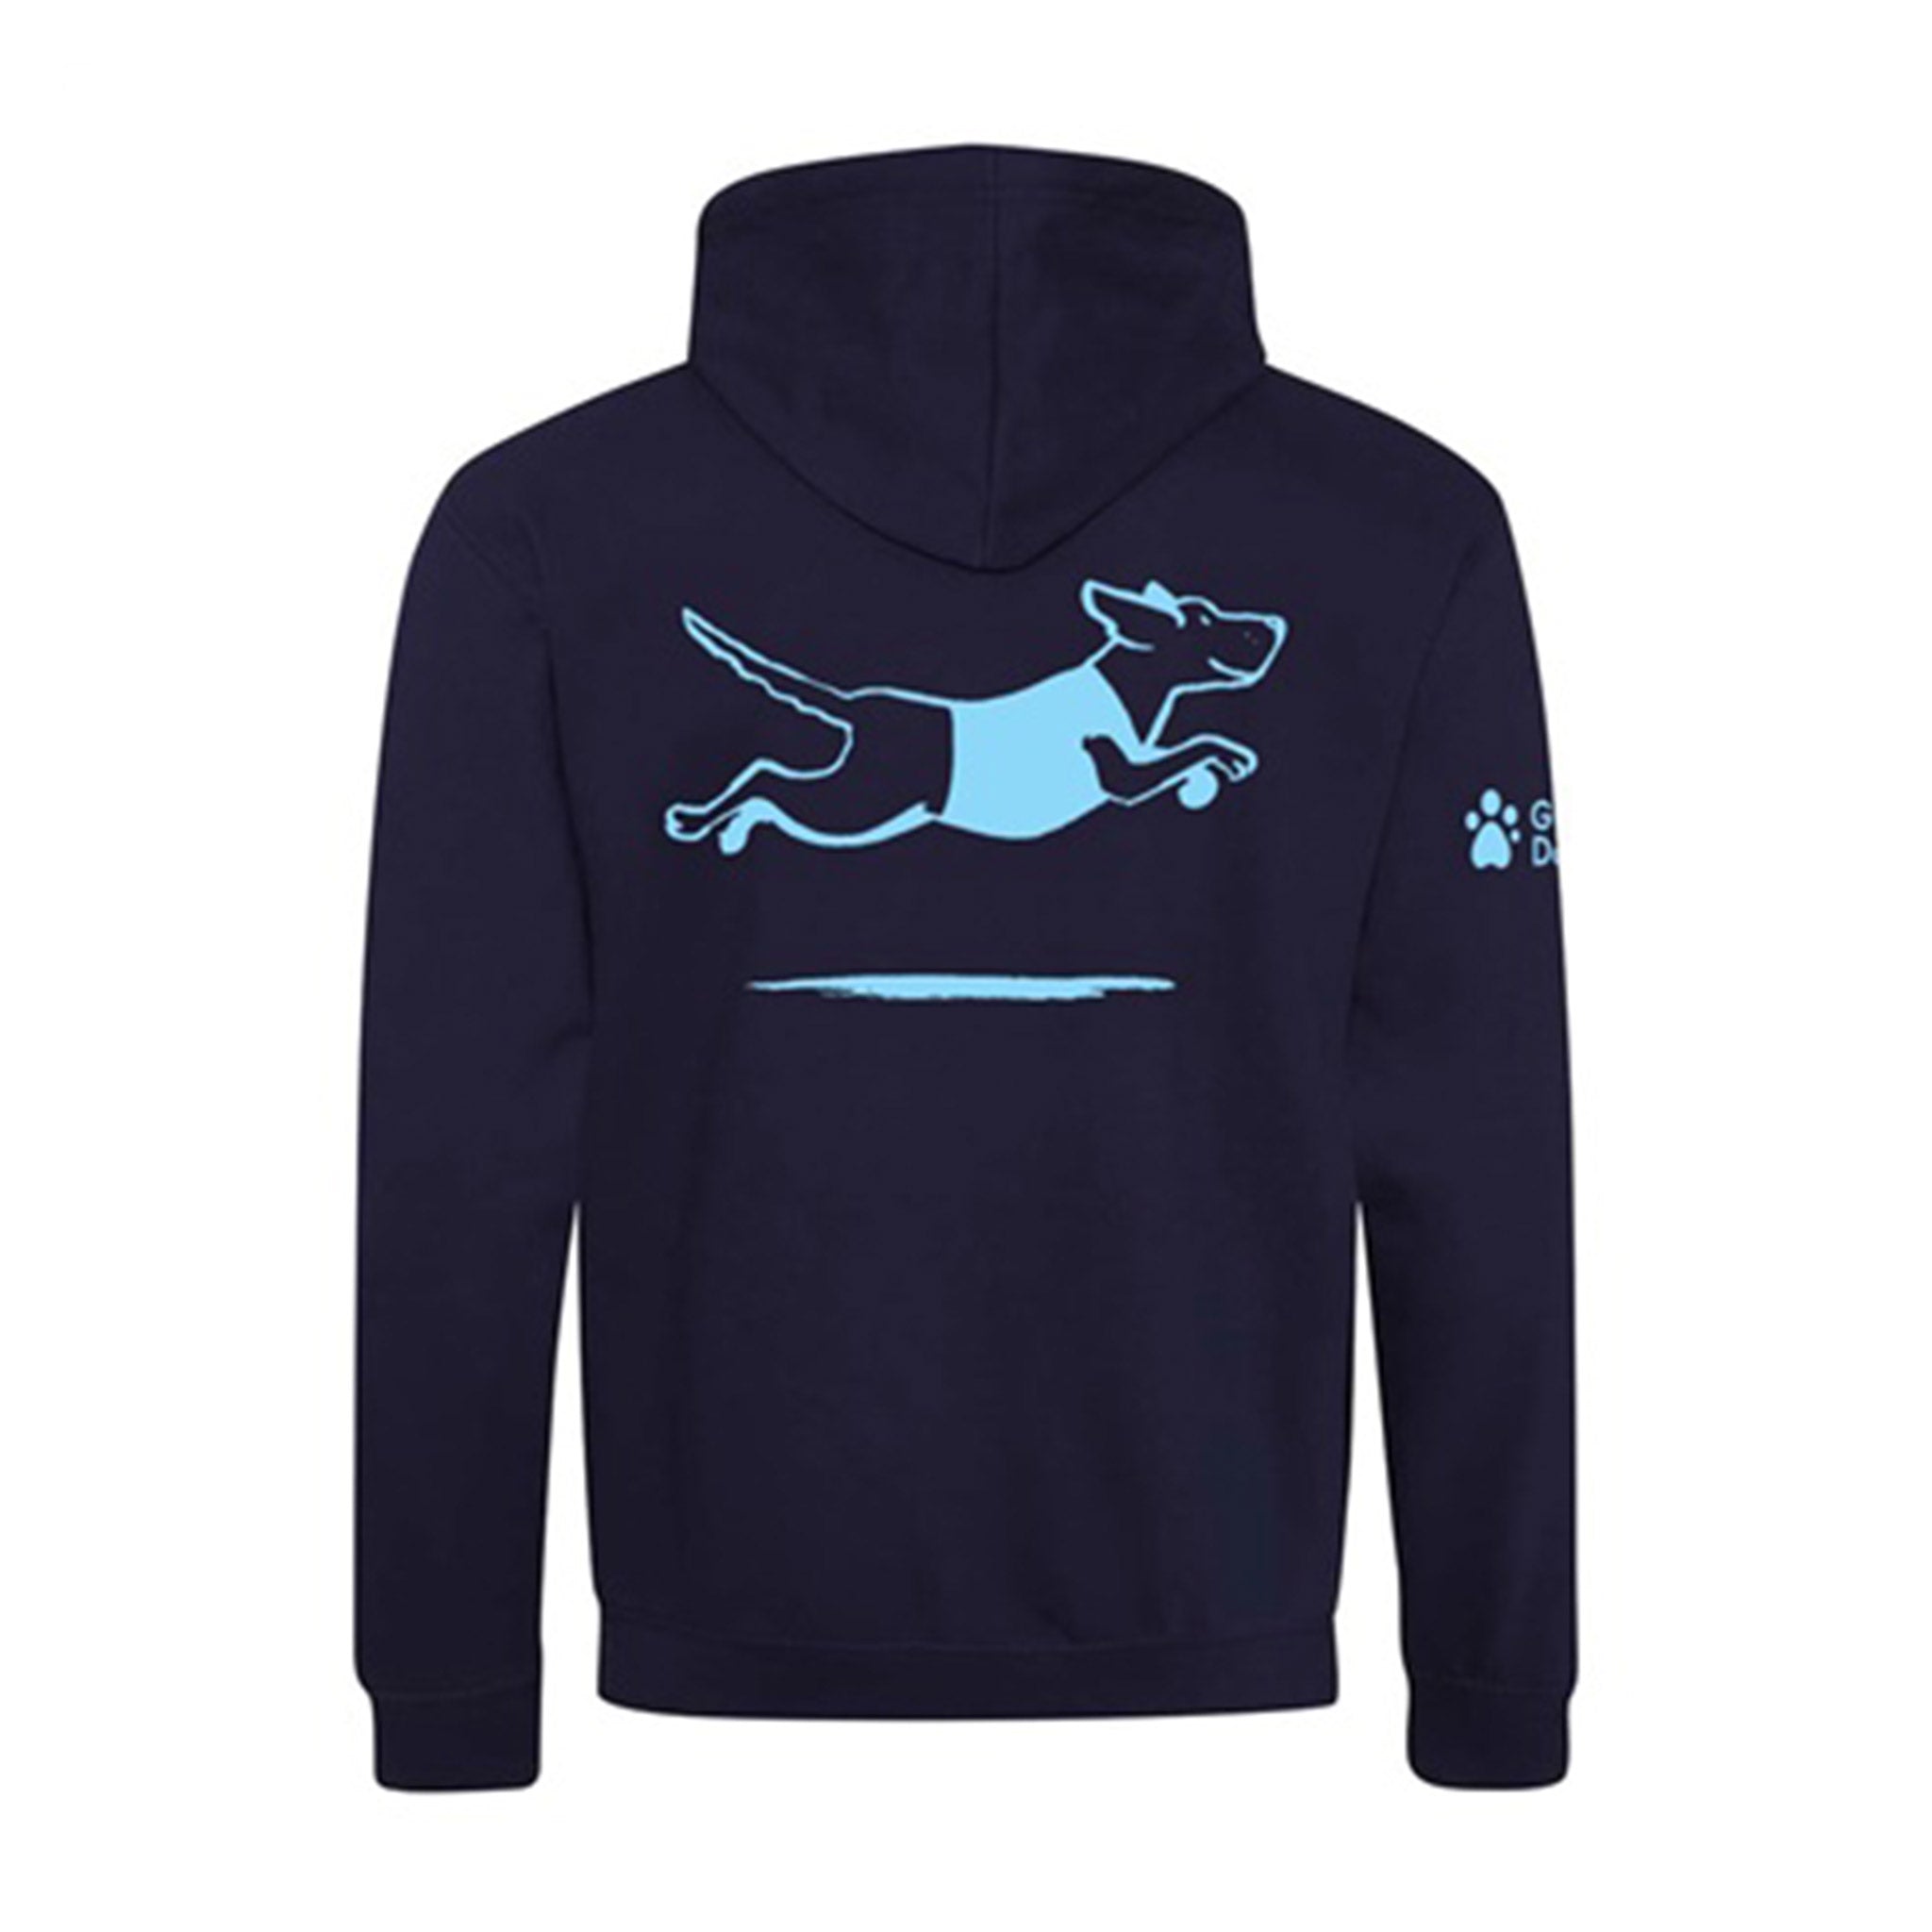 Image shows the back of a navy blue hoodie, there is leaping Labrador design printed on the front in light blue and the Guide Dogs logo is printed on the right sleeve.